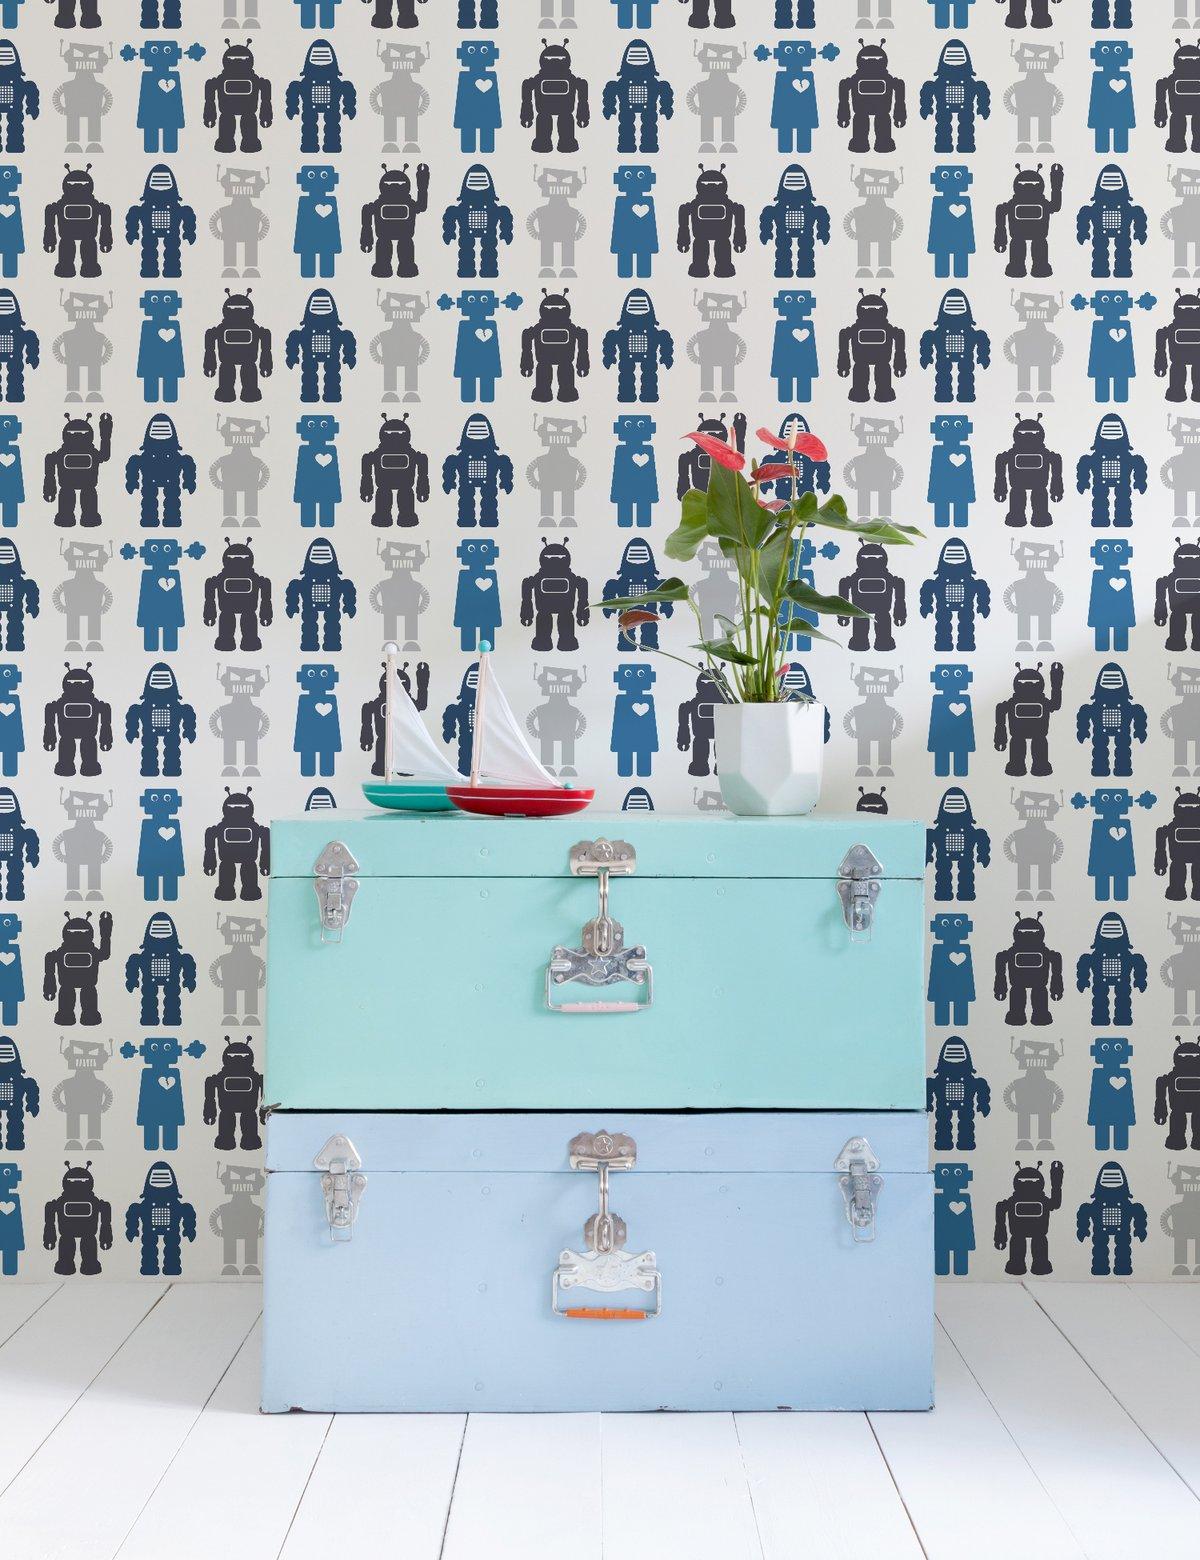 This hand-printed wall-covering with Aimée's signature Robots is he perfect wallpaper for your child's nursery, bedroom or playroom!

Samples are available for $18 including US shipping, please message us to purchase.

Printing: Digital pigment